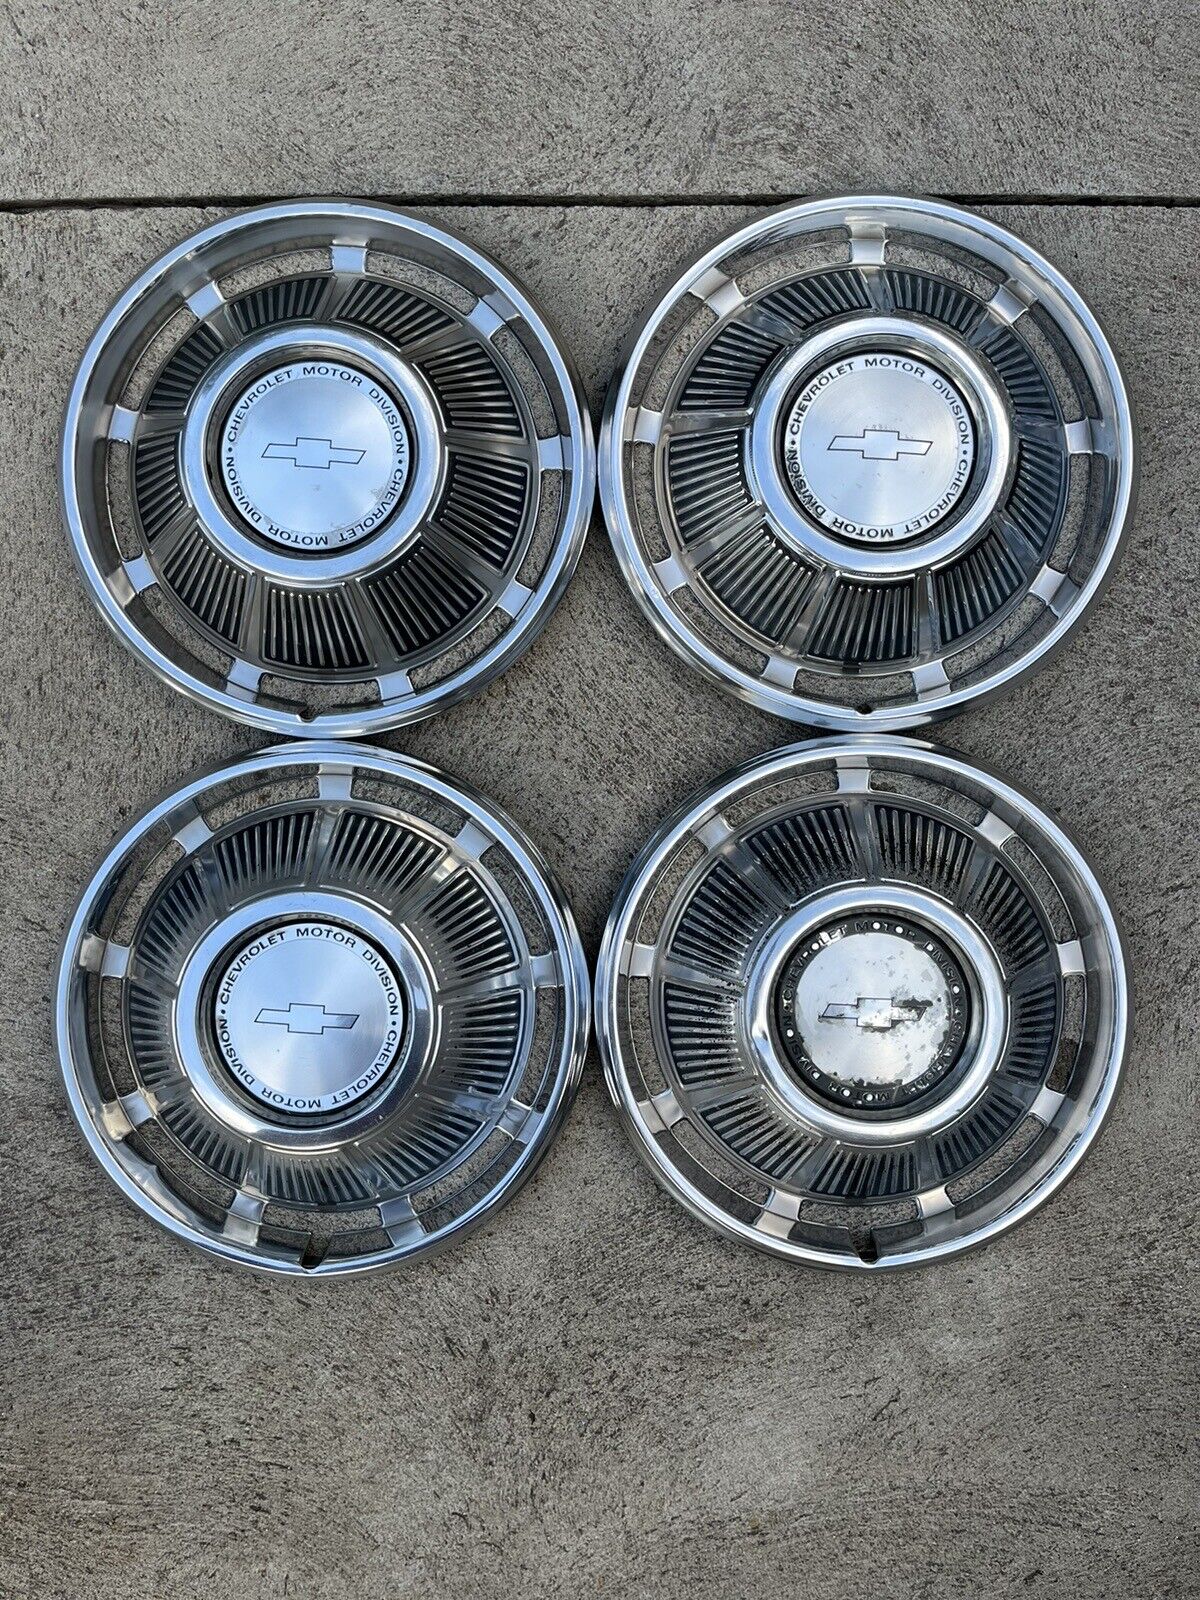 1969 Chevy Impala HubCaps Bel Air Biscayne Chevrolet Motor Division 14” Wheel Co